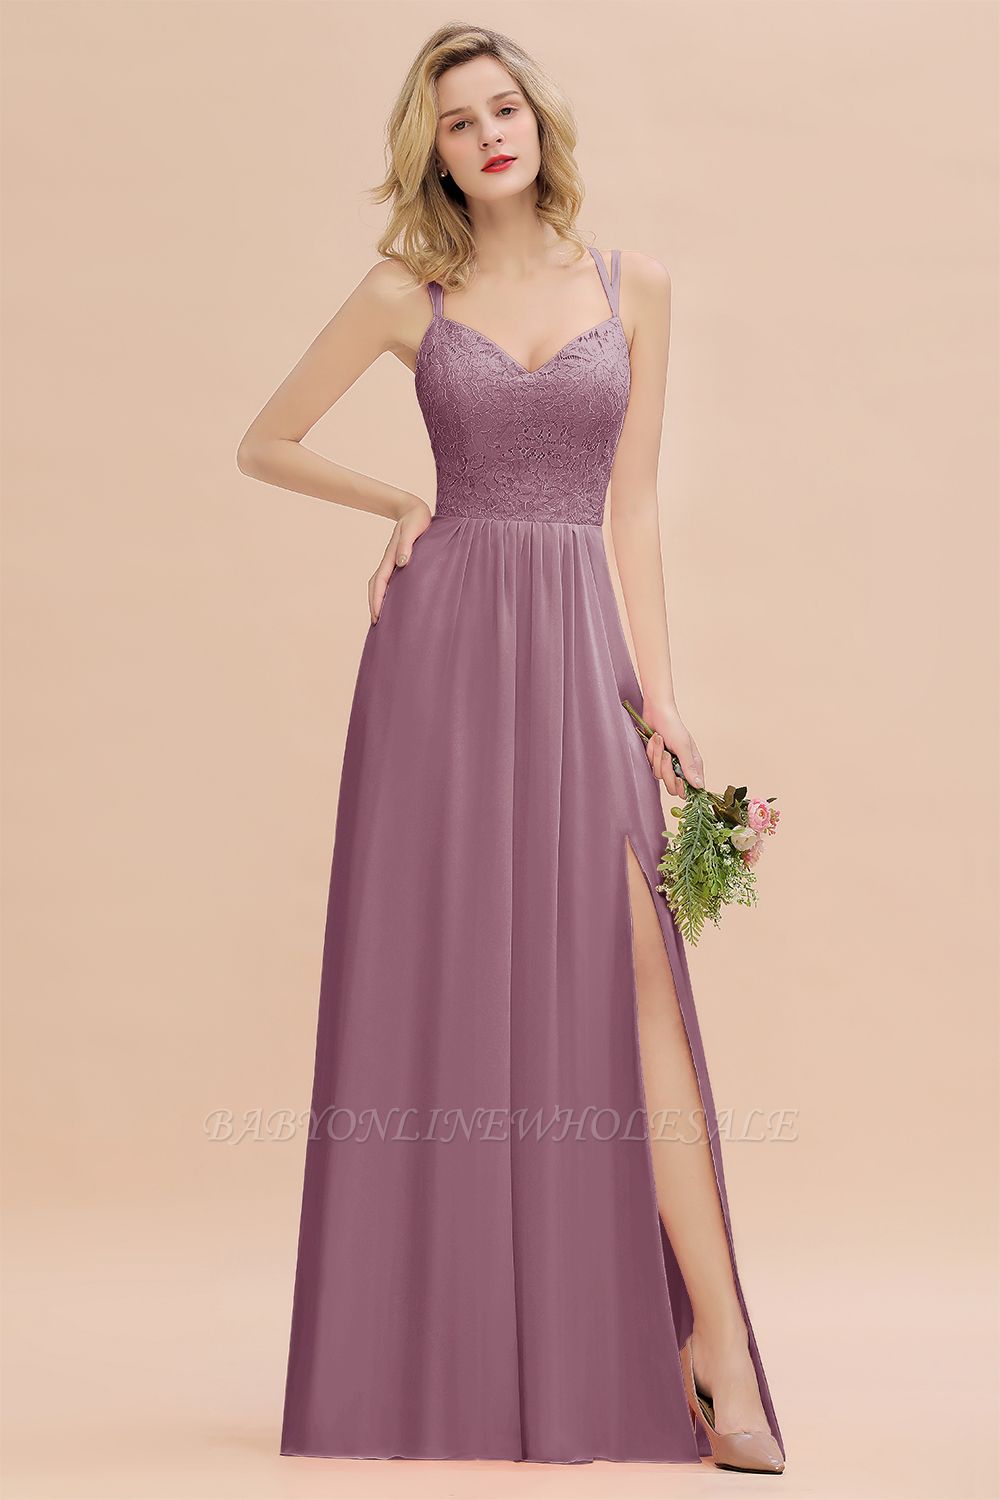 Sweetheart Aline Lace Party Dress Sleeveless Bridesmaid Dress with Side Slit